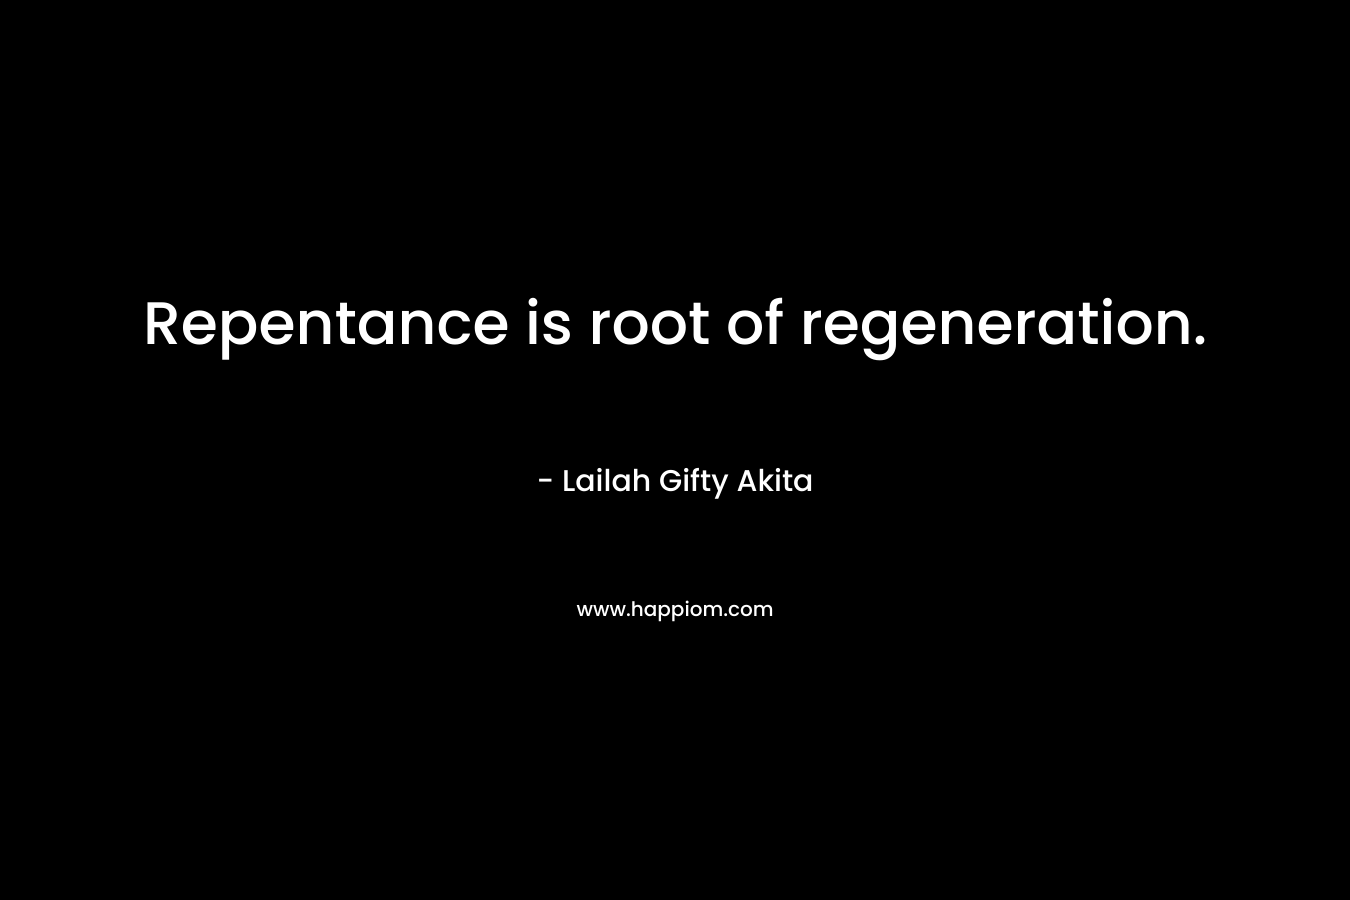 Repentance is root of regeneration. – Lailah Gifty Akita